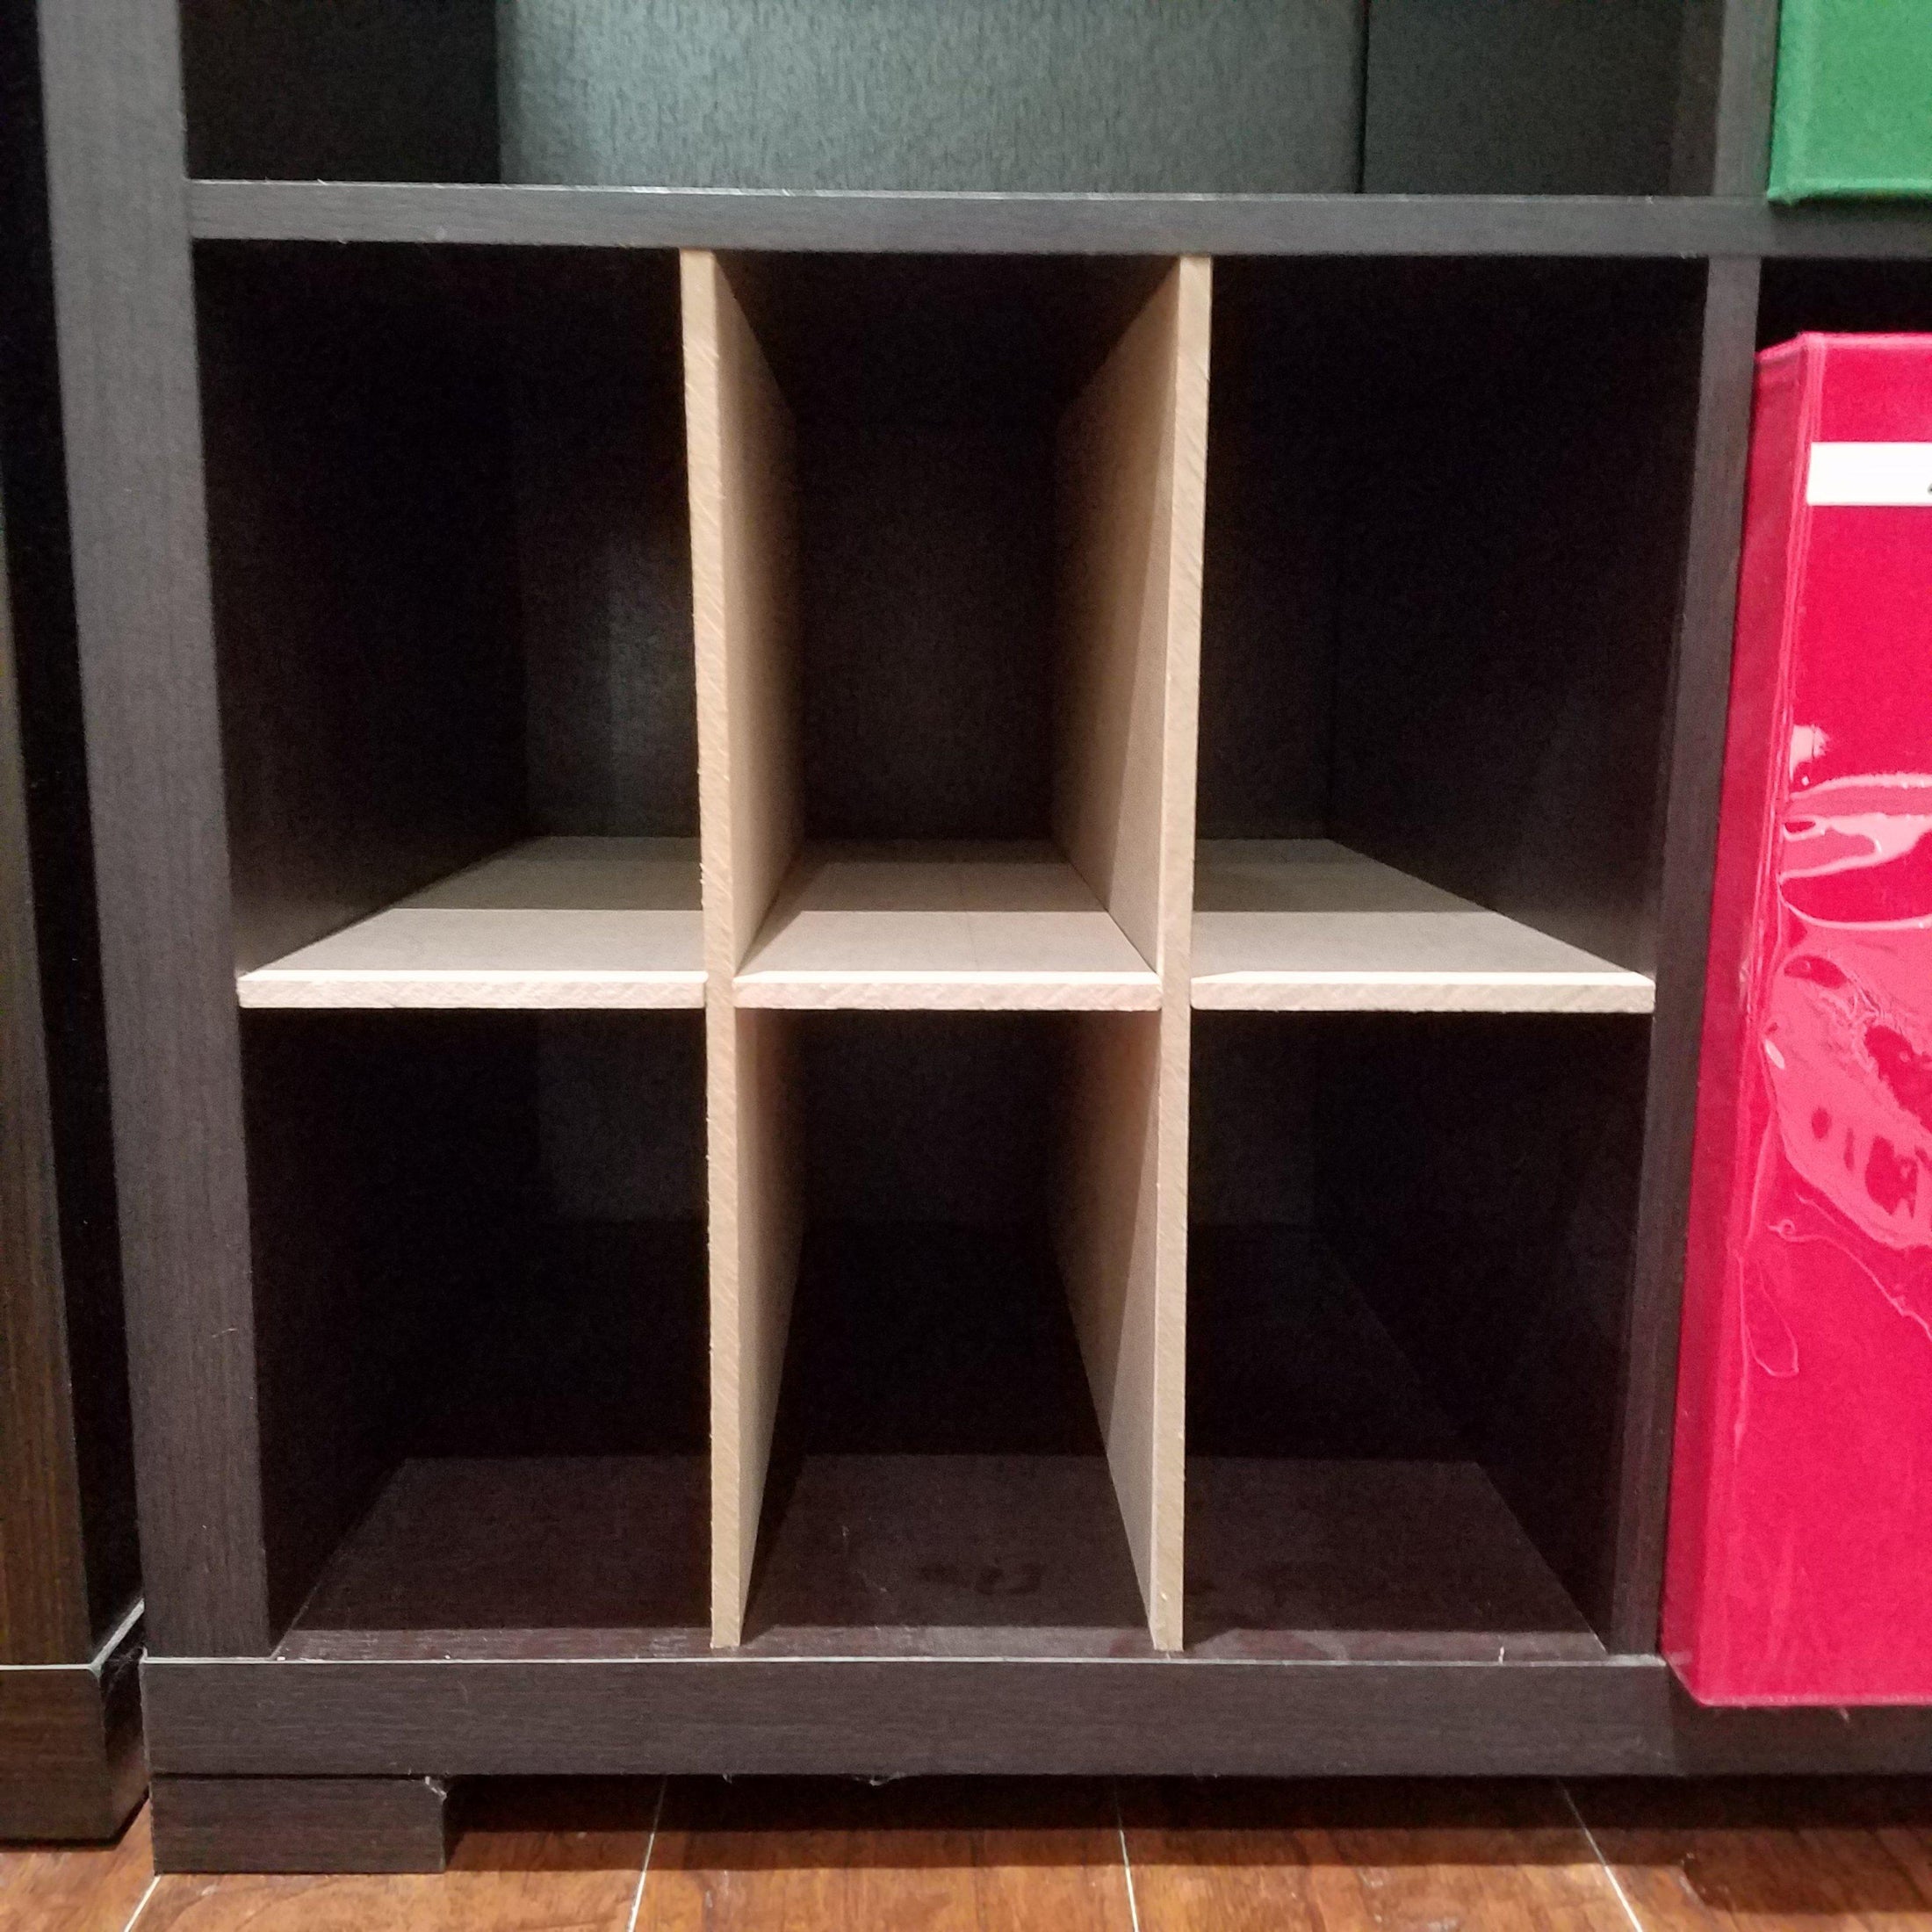 6 Cubby Cube Insert for Cube Storage Shelves-fun stuff-The Steady Hand